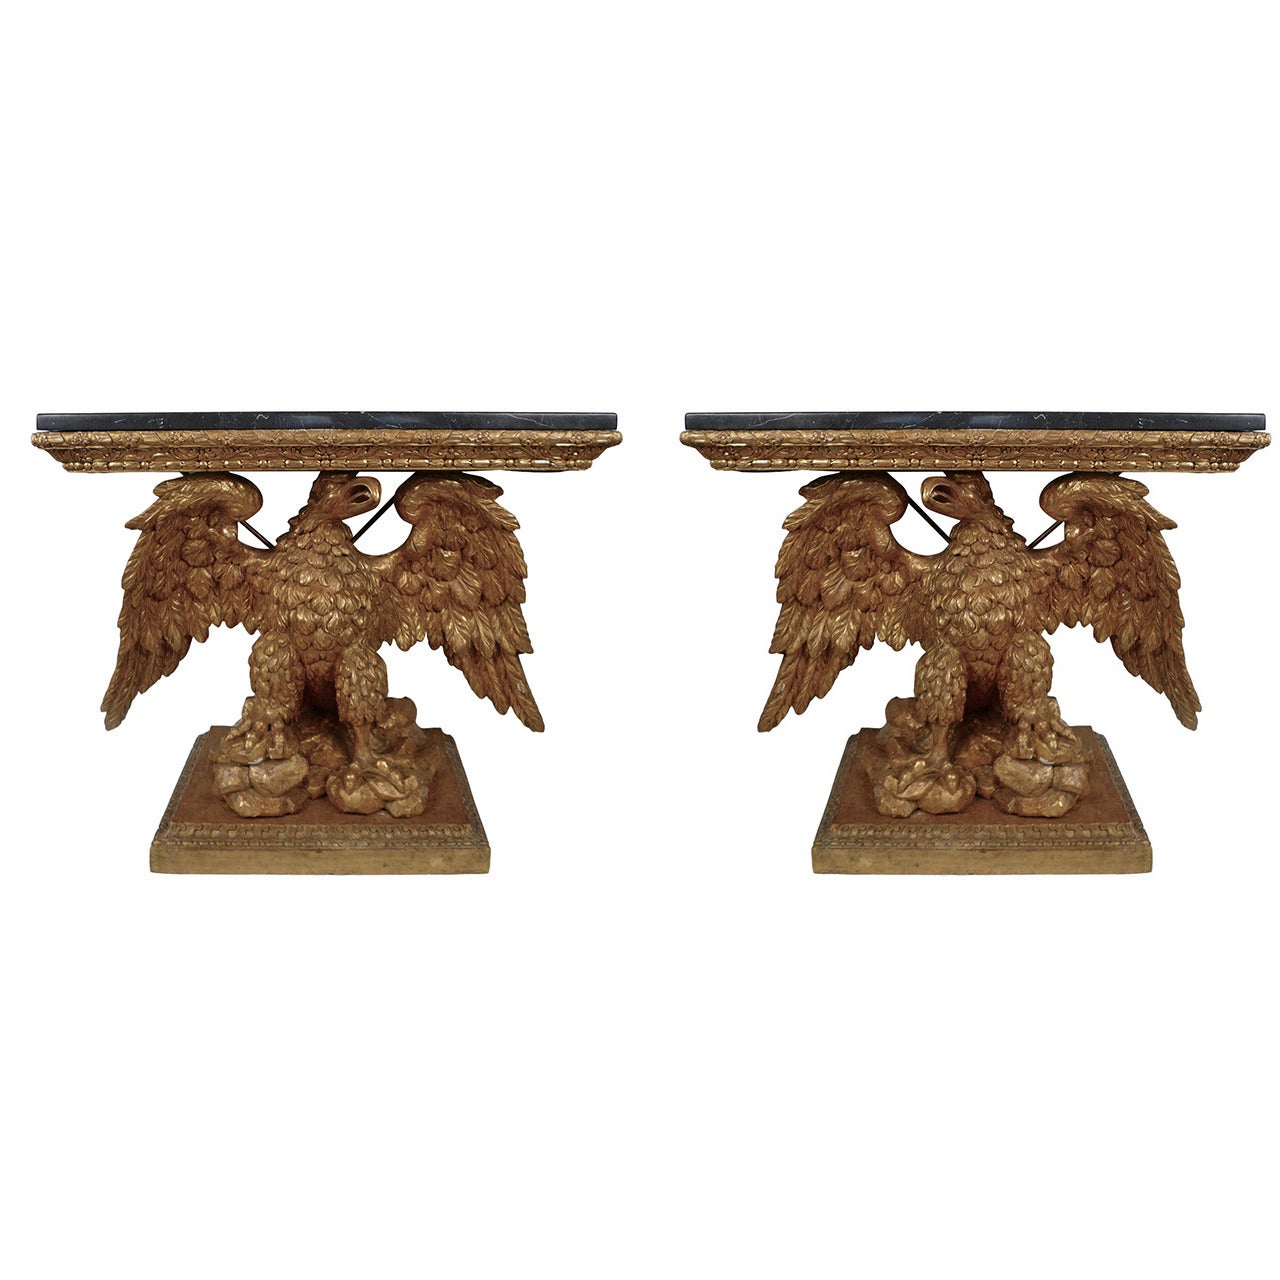 Pair of 18th Century Giltwood Eagle Console Tables in the Manner of William Kent